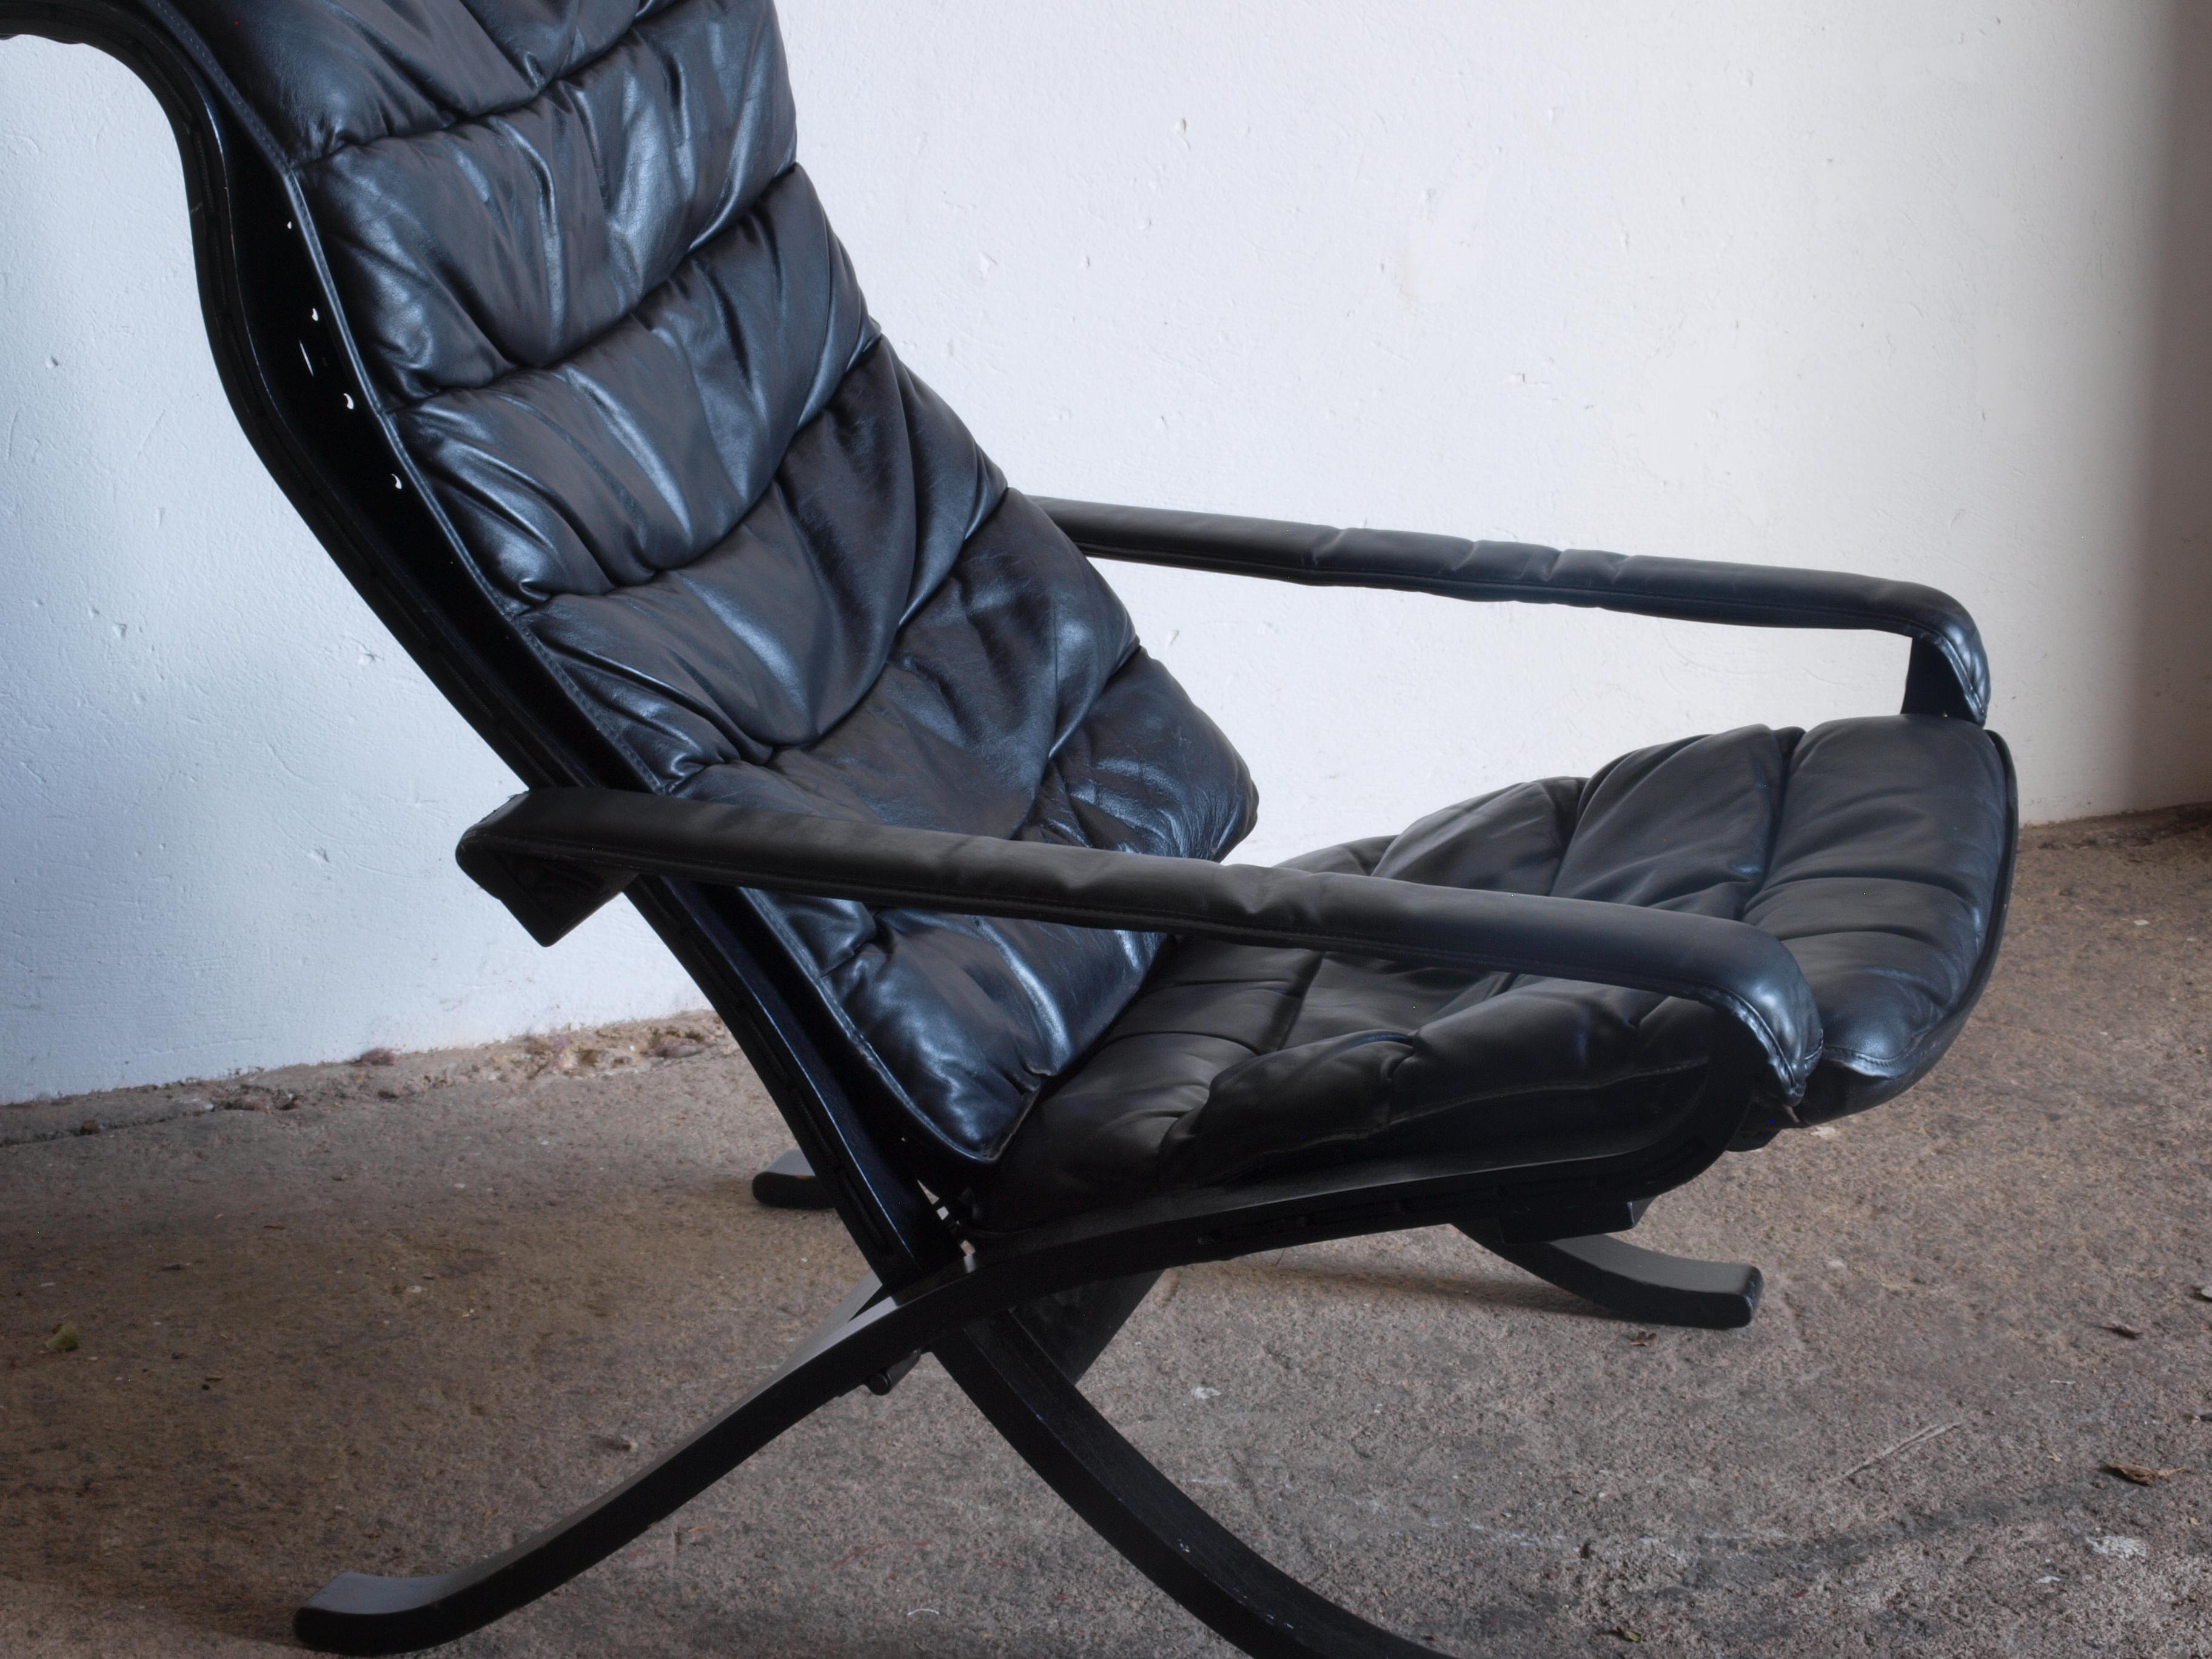 Enhance your interior with this iconic Westnofa Norway lounge chair called 